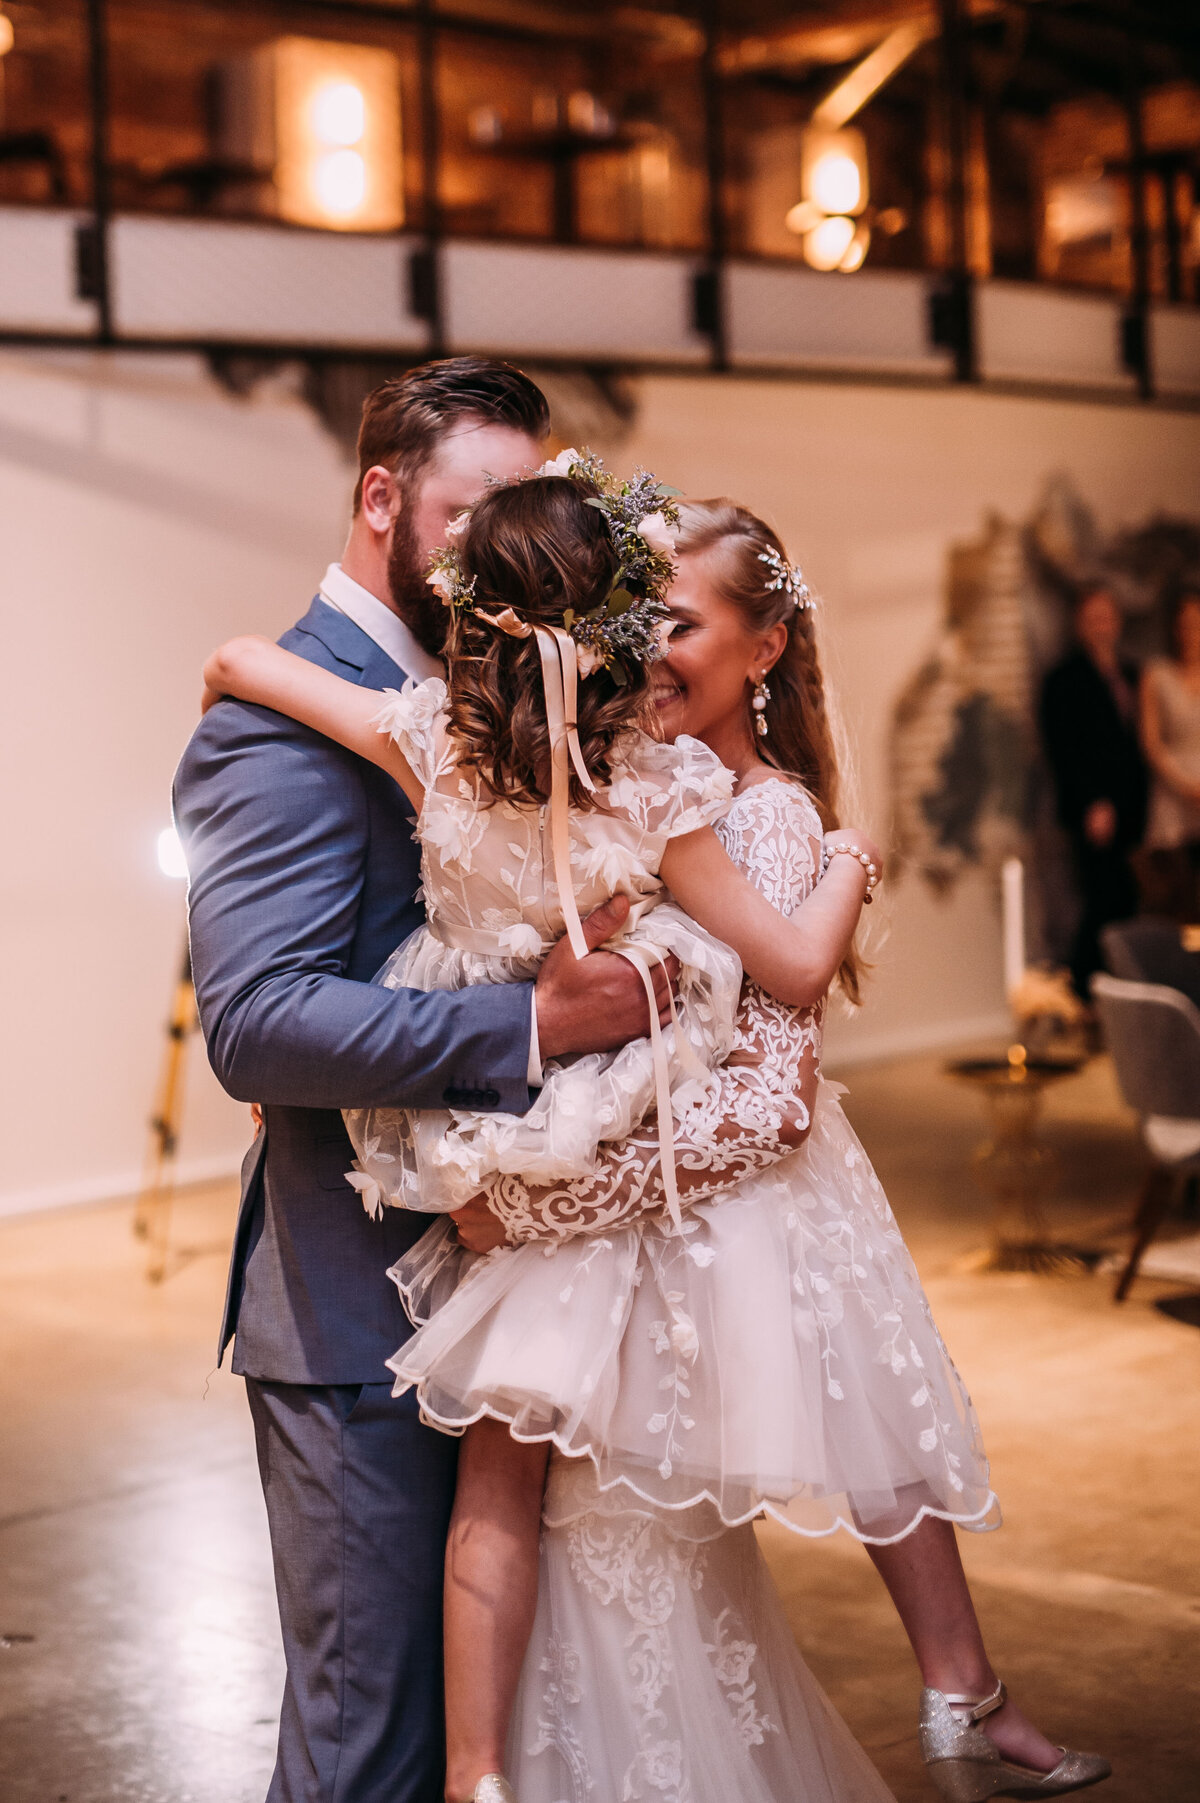 bride and groom dancing at wedding reception blended family